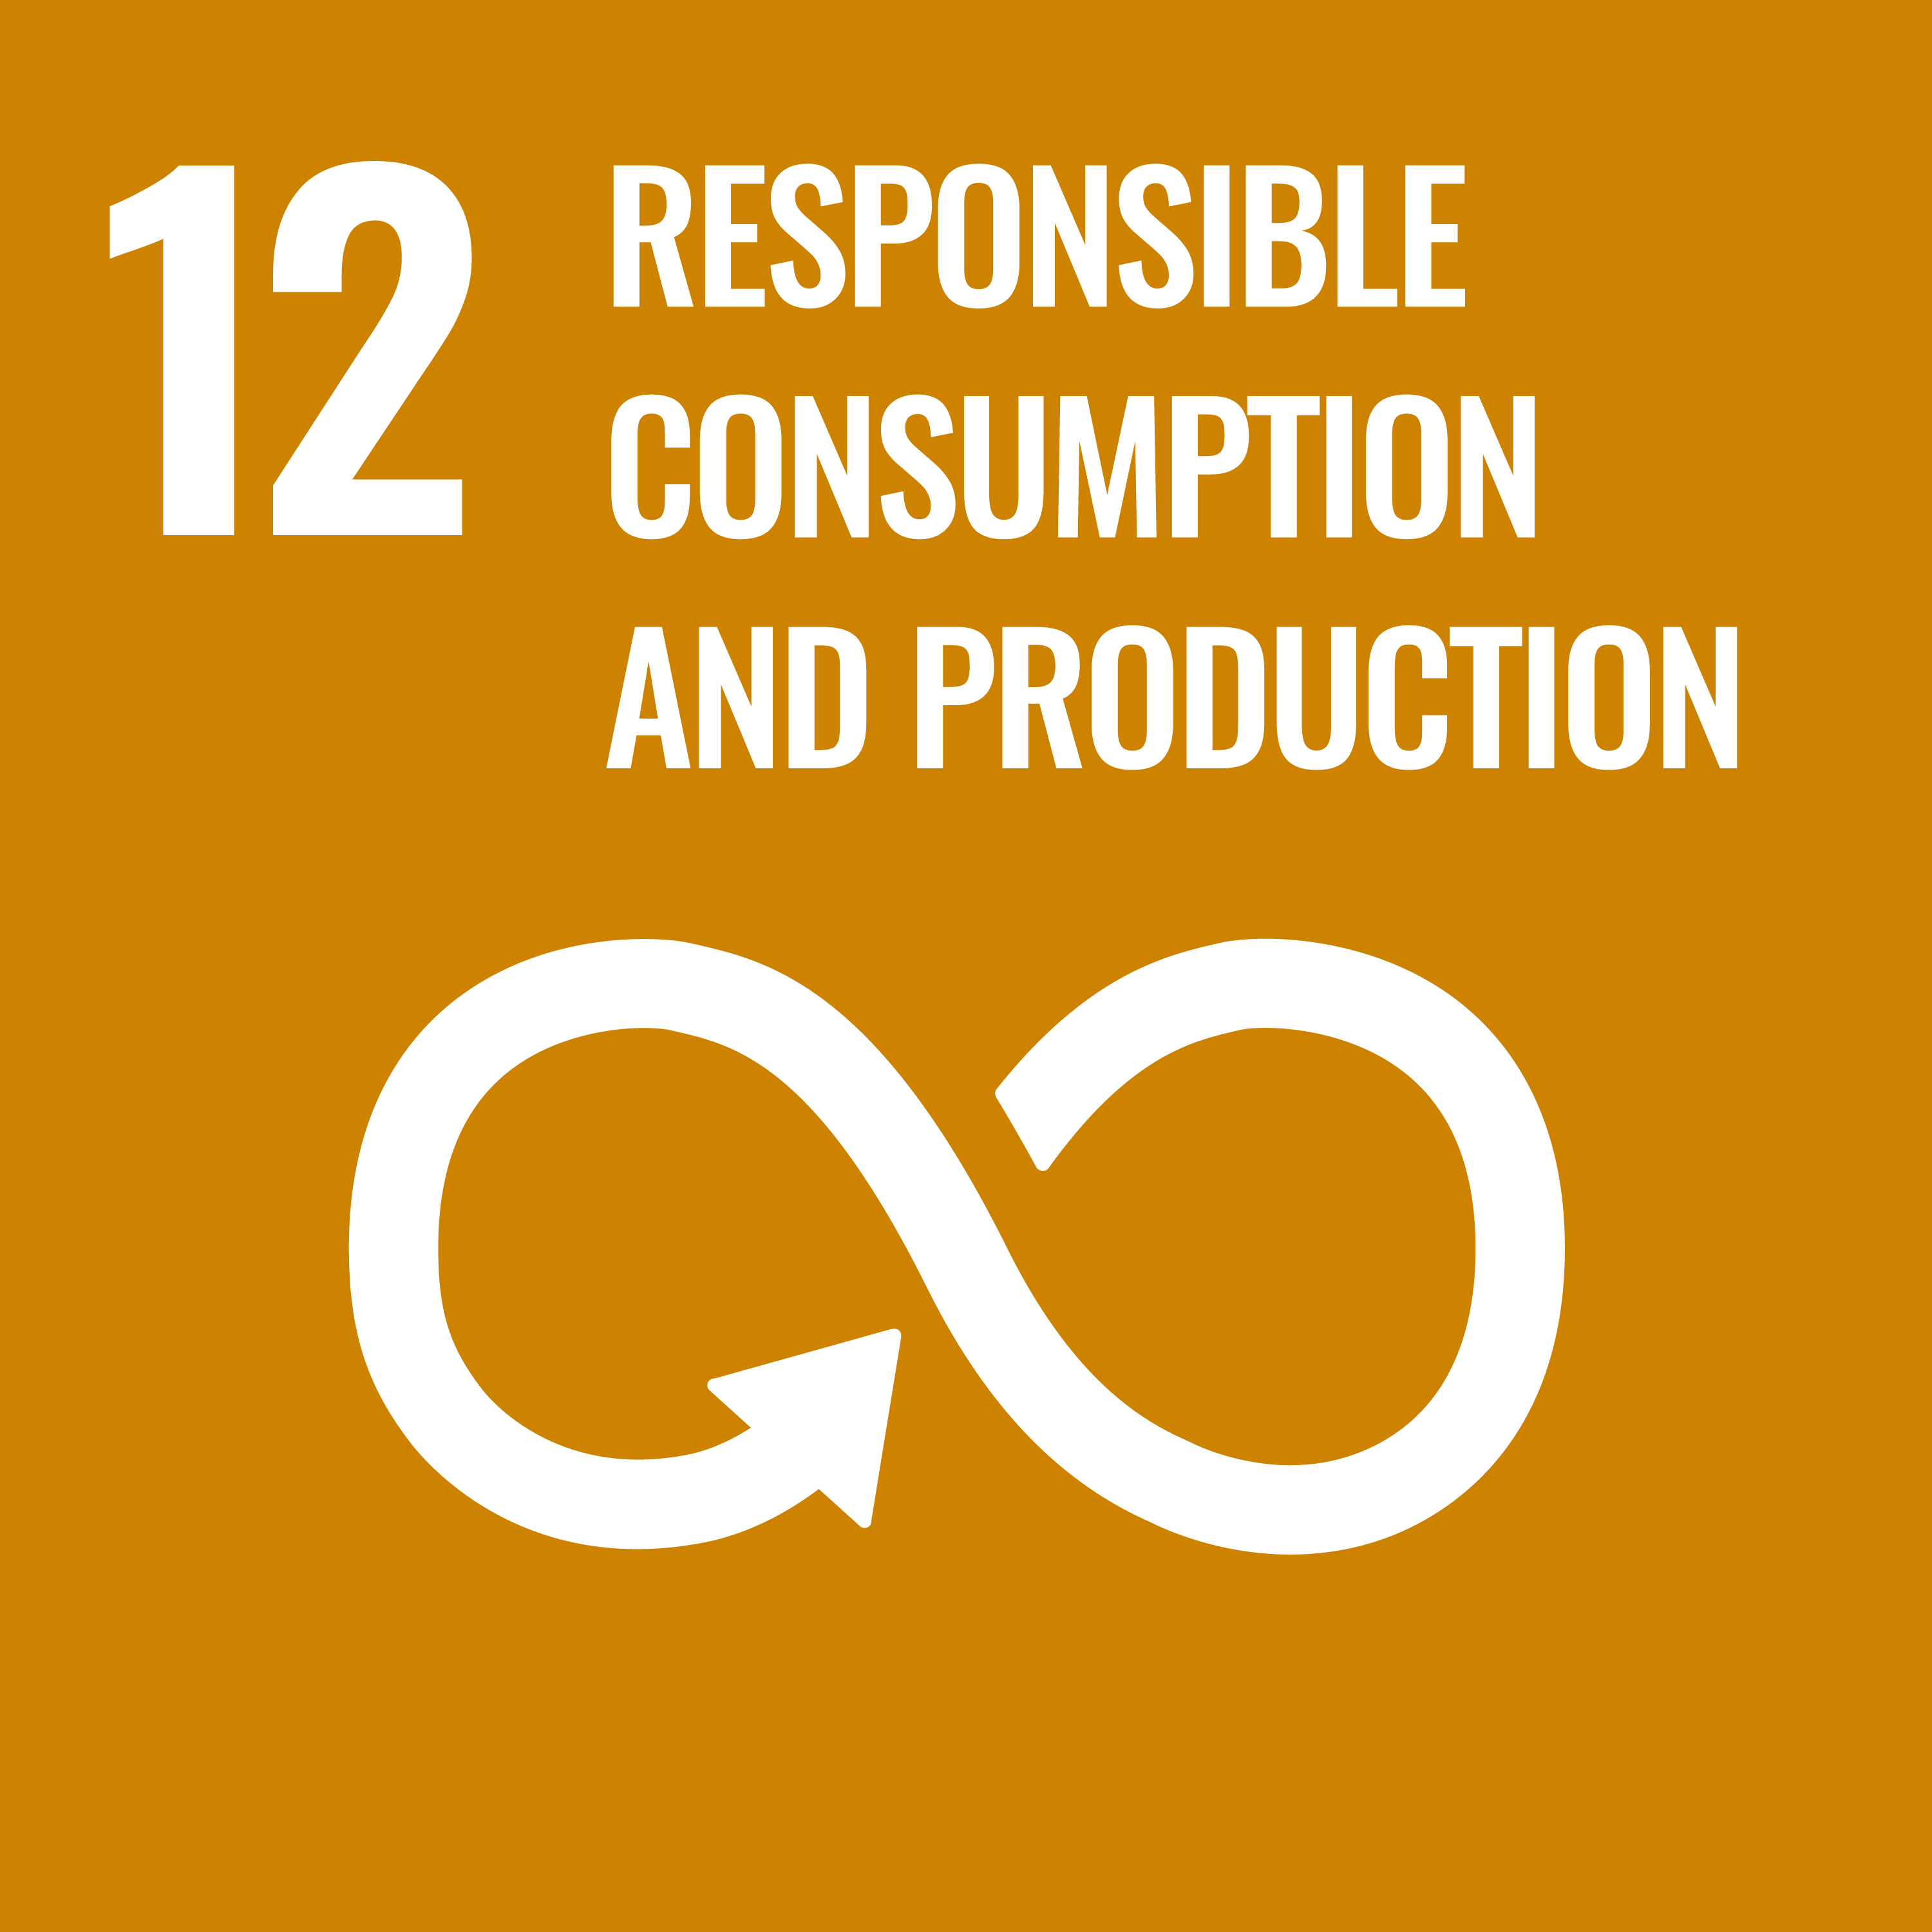 A yellow icon depicting an infinity symbol and the text "12: Responsible consumption and production"